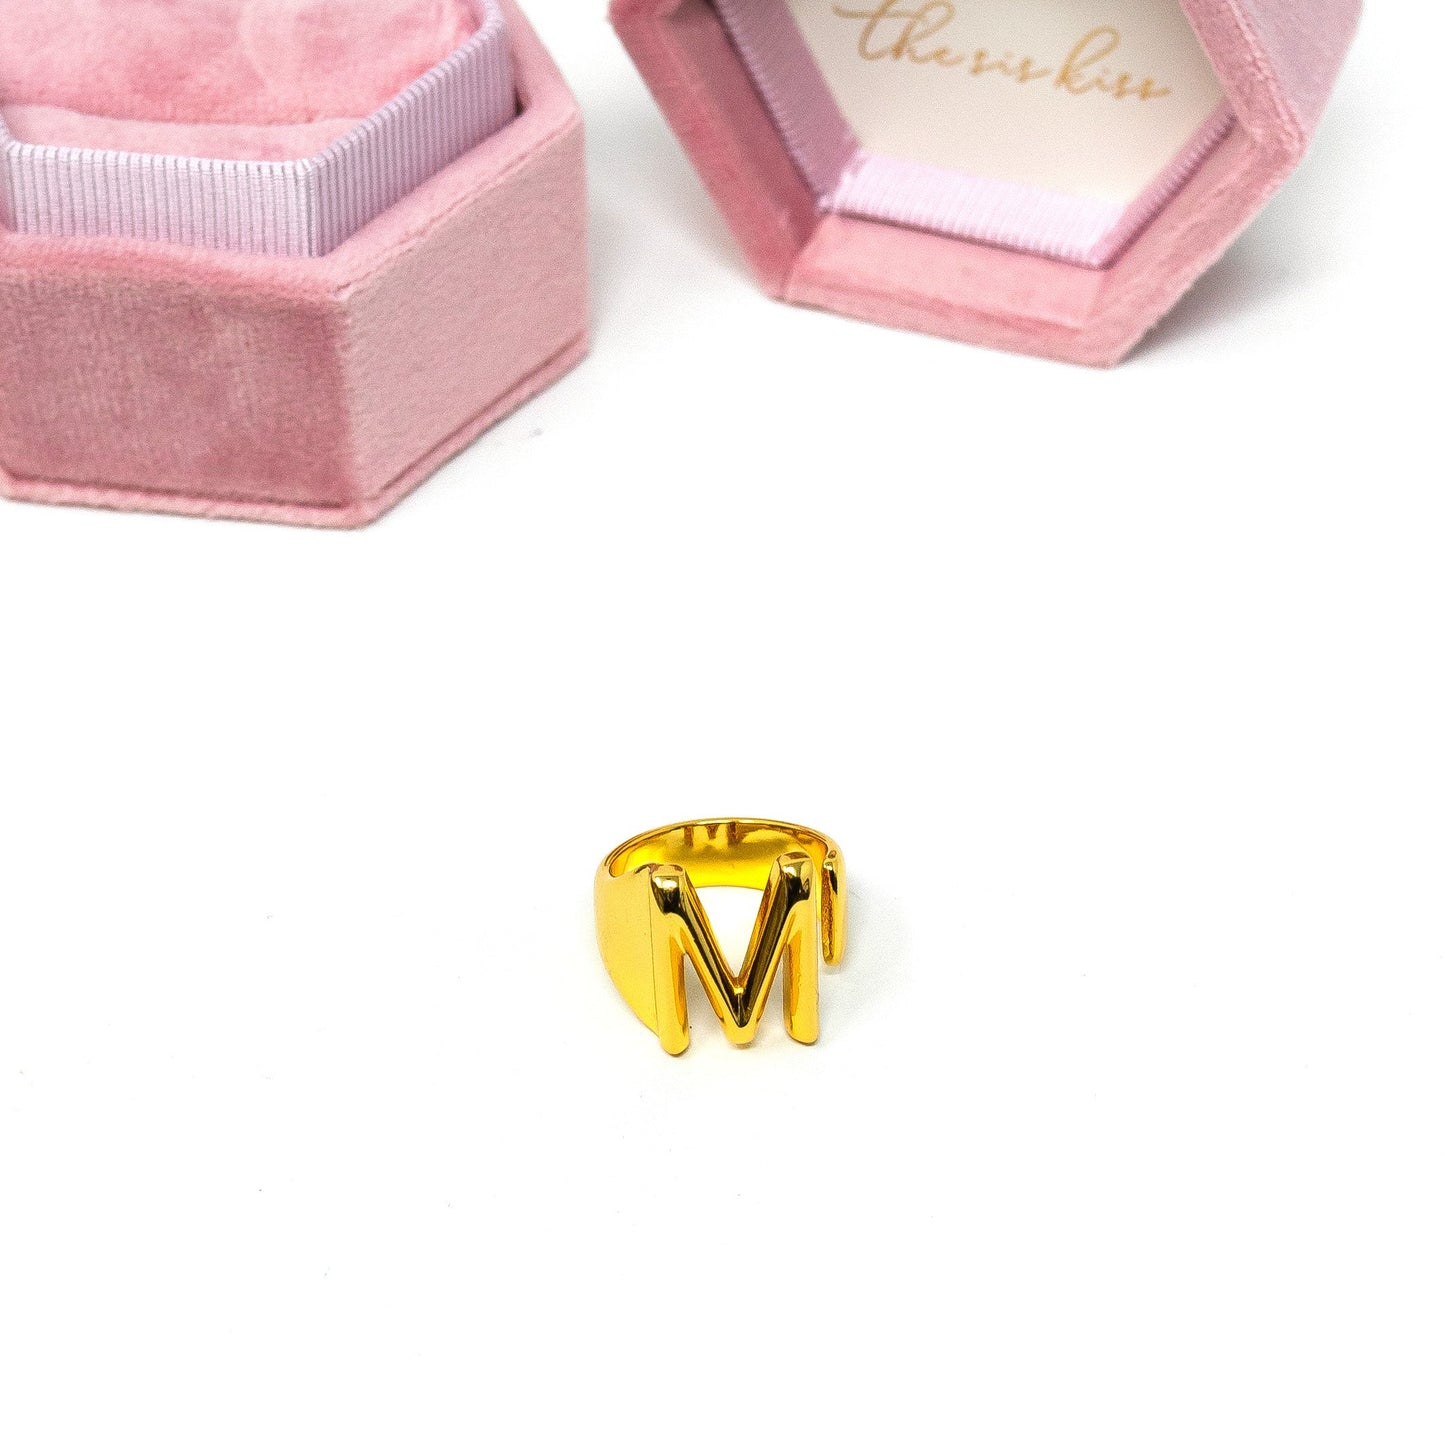 Statement Initial Ring in Bold Block JEWELRY The Sis Kiss